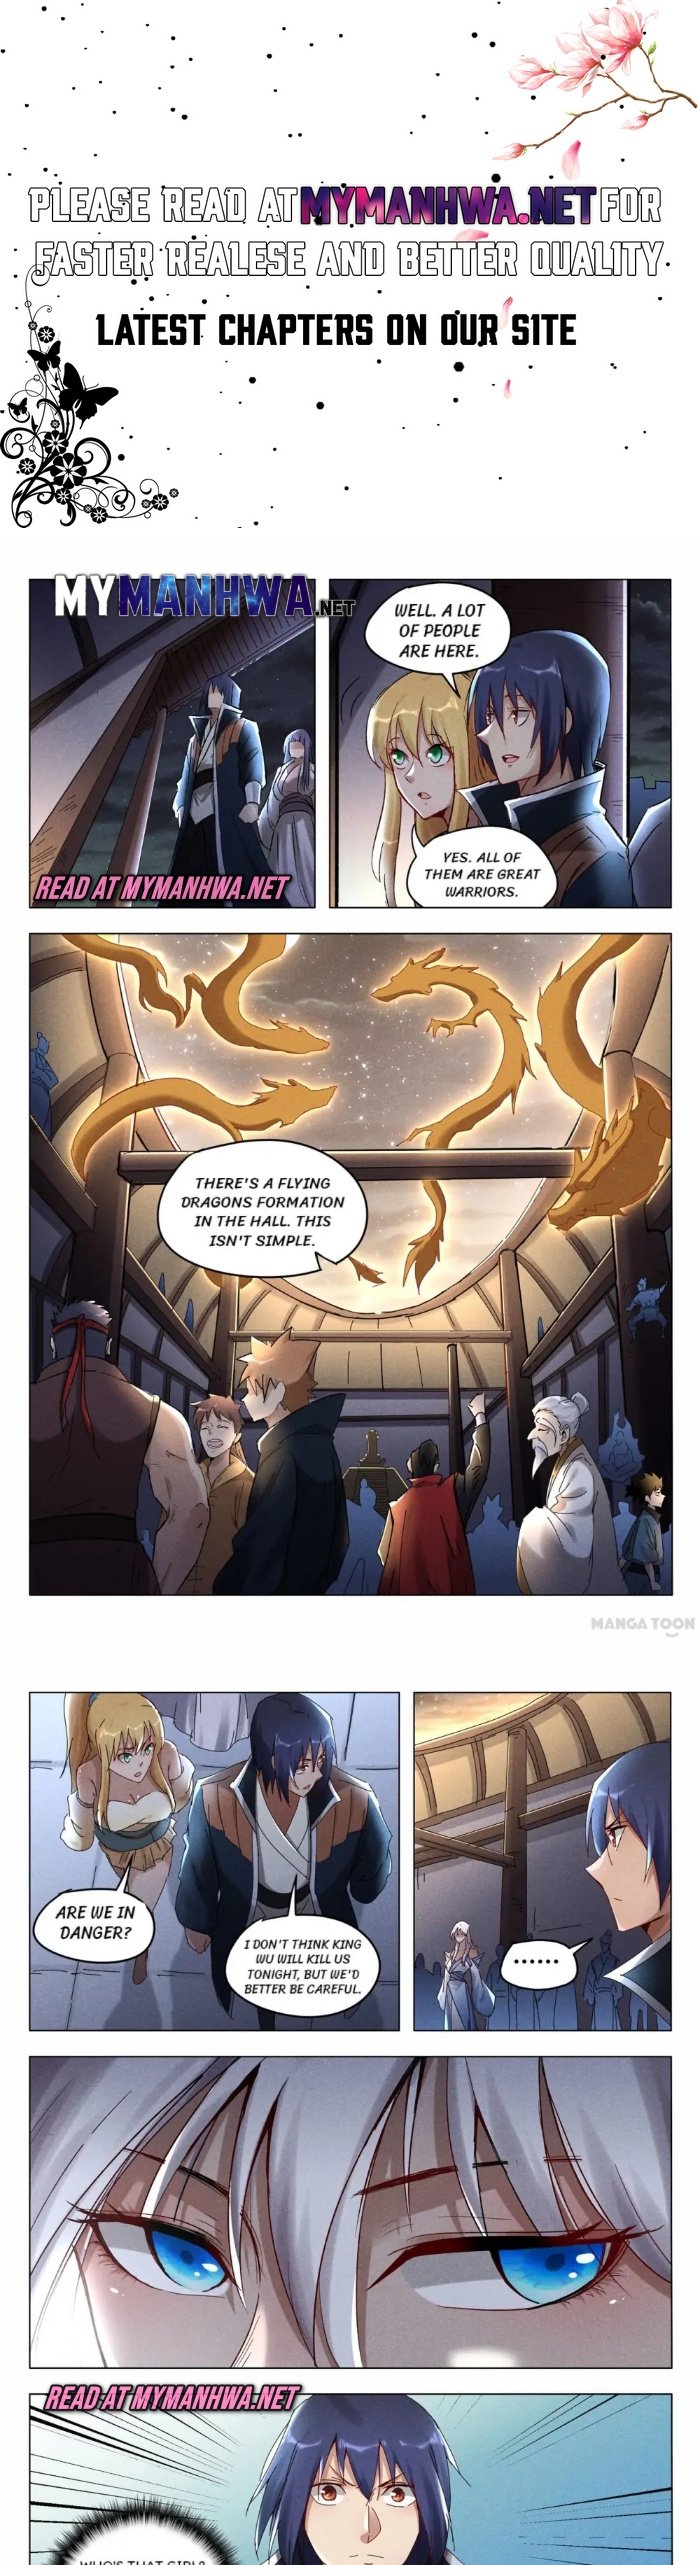 Master of Legendary Realms Chapter 419